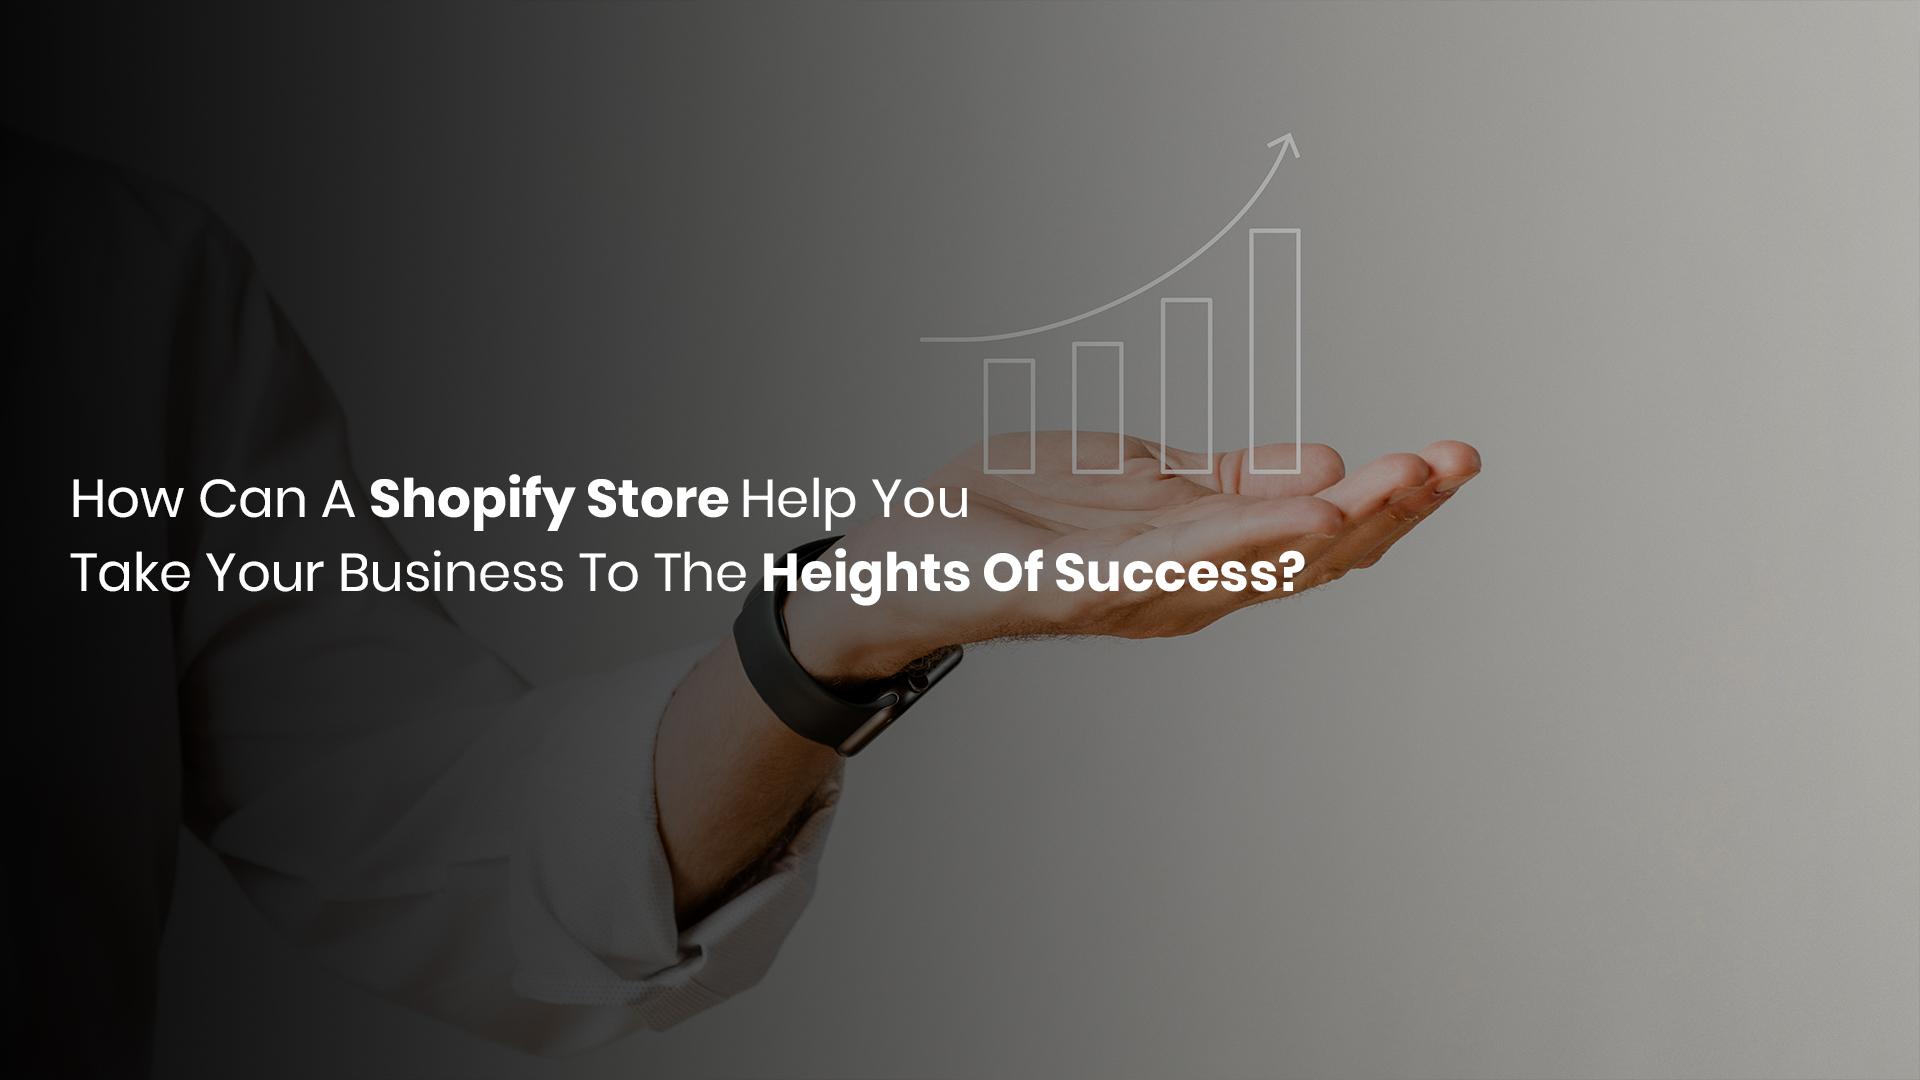 How A Shopify Store Helps Take Your Business To New Heights